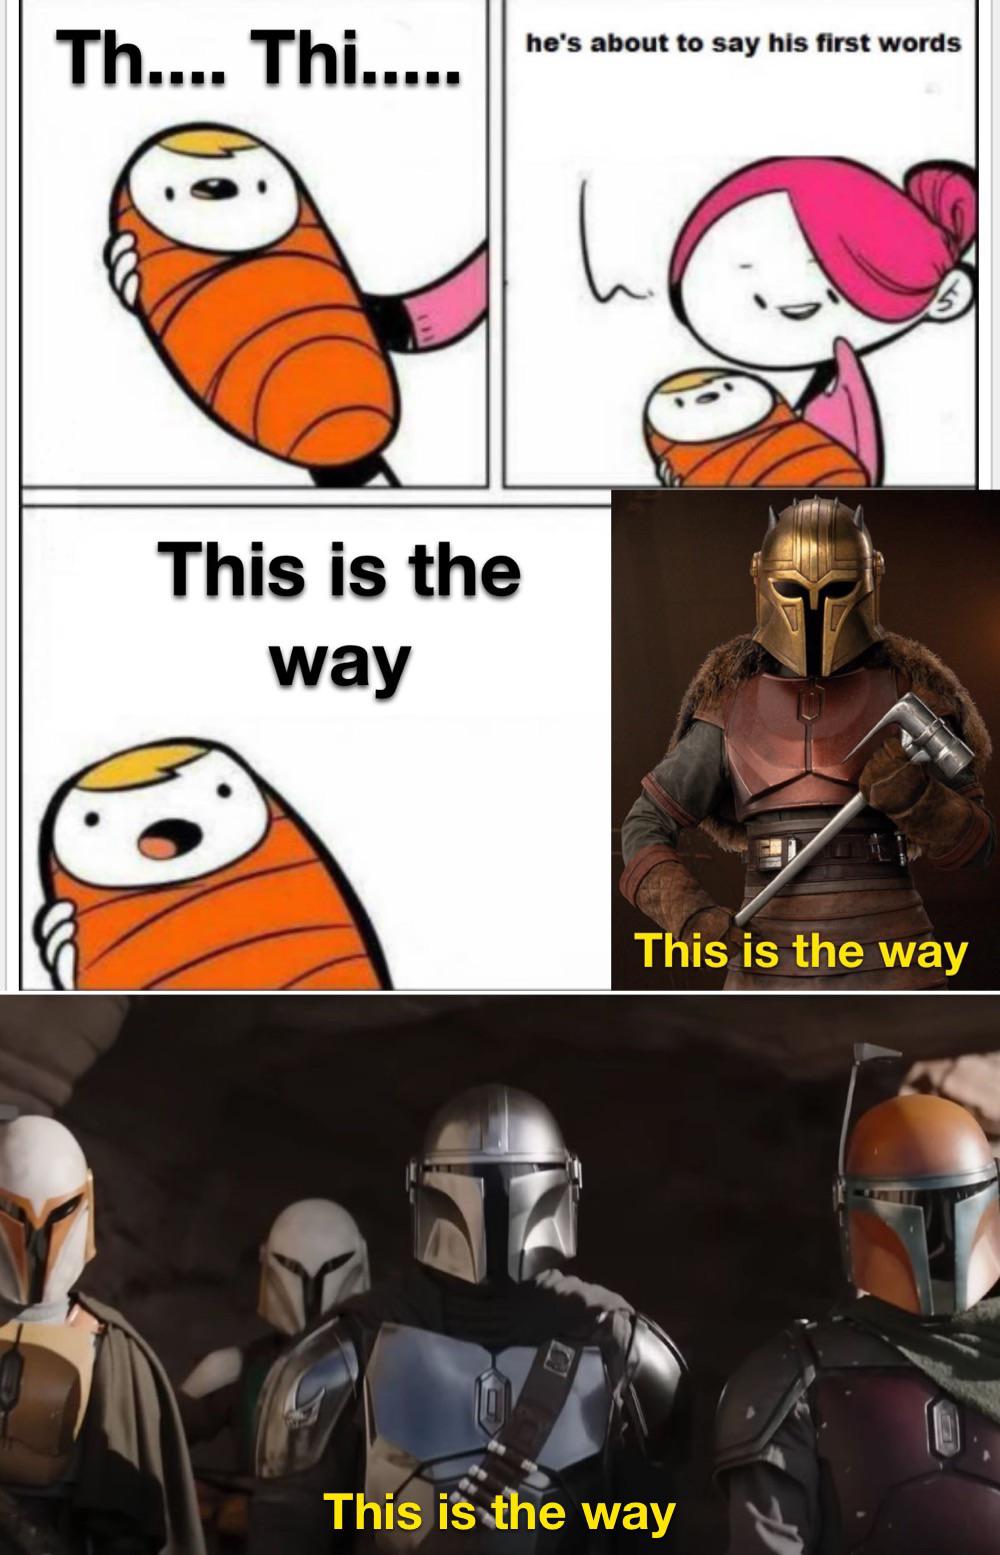 monday morning randomness - mandalorian mandalorians - Th.... Thi. This is the way he's about to say his first words This is the way This is the way